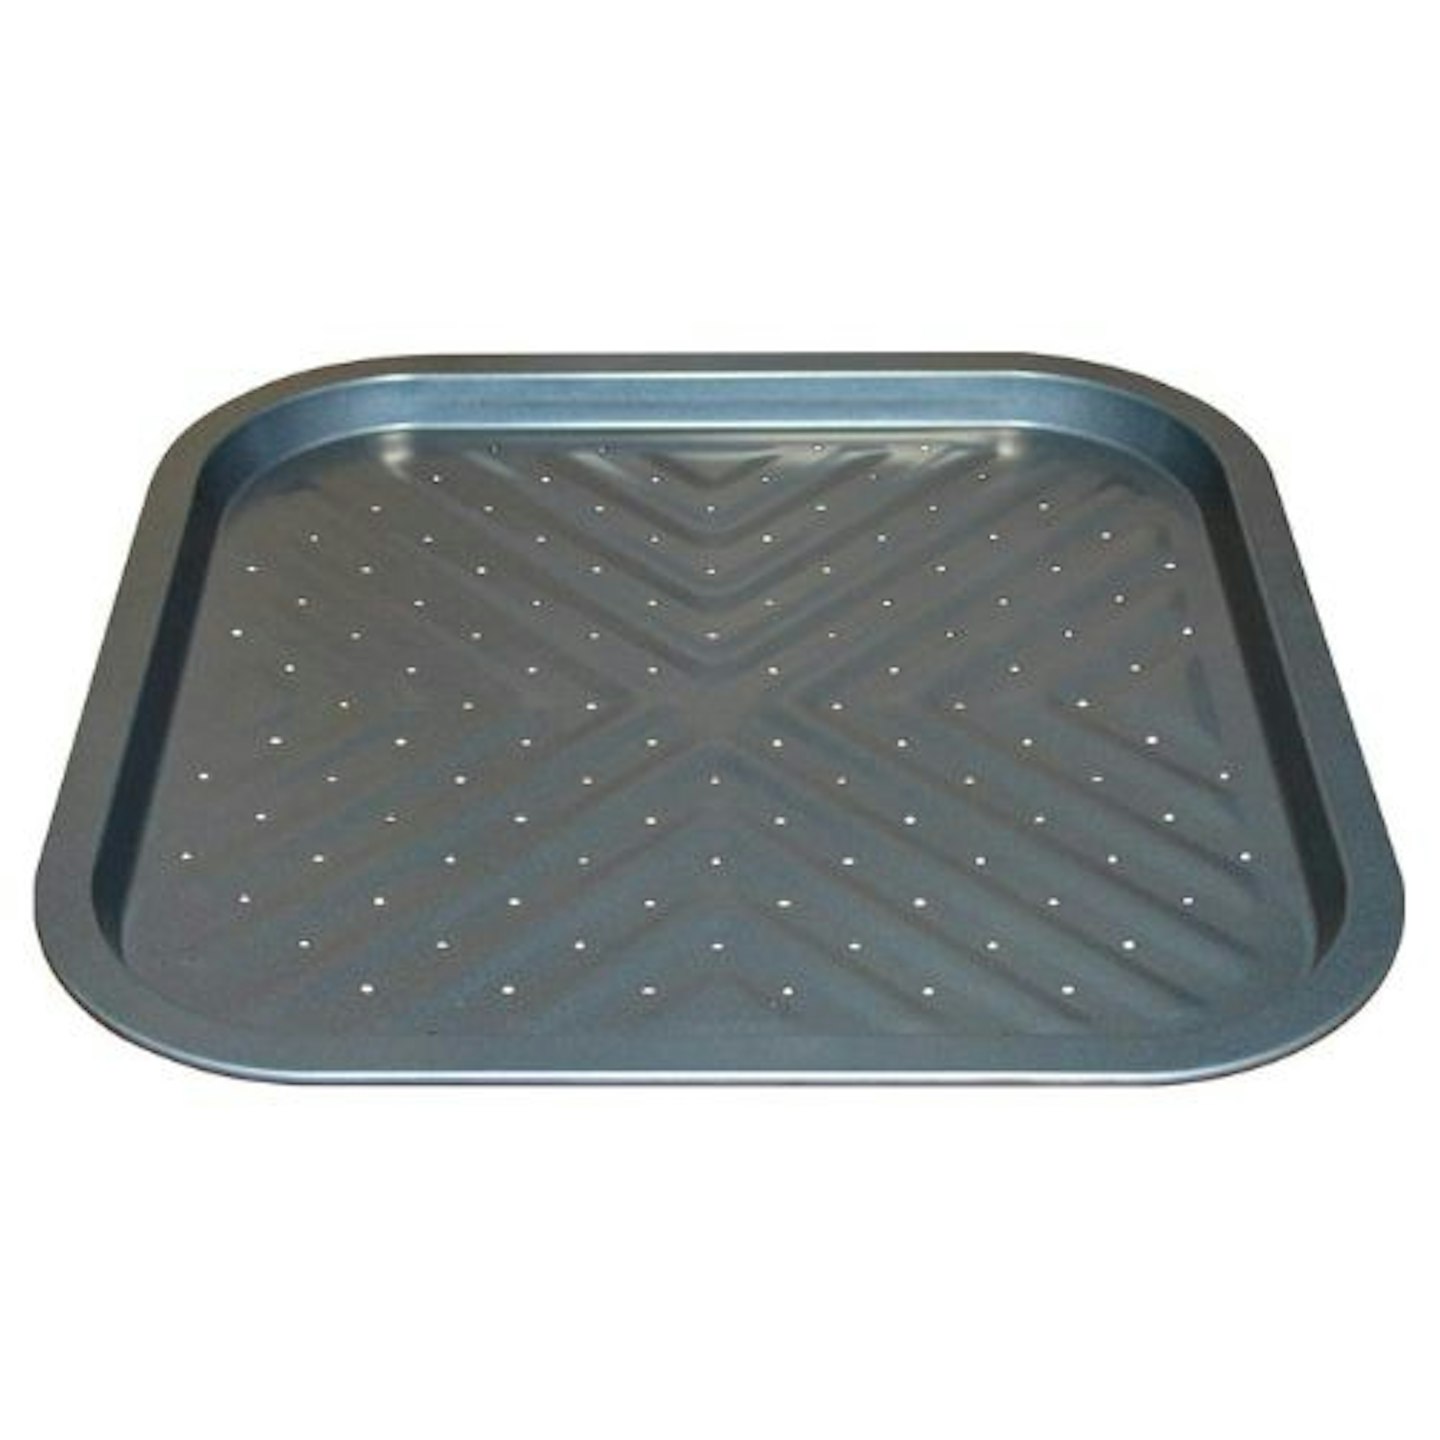 https://images.bauerhosting.com/affiliates/sites/10/2023/10/Mingcao-Nonstick-Square-Pizza-Pan-14-x14-Inch-Carbon-Steel-Tray-with-Holes-Pizza-Bakeware-for-Oven-Baking-PizzaFrench-Fries.jpg?auto=format&w=1440&q=80